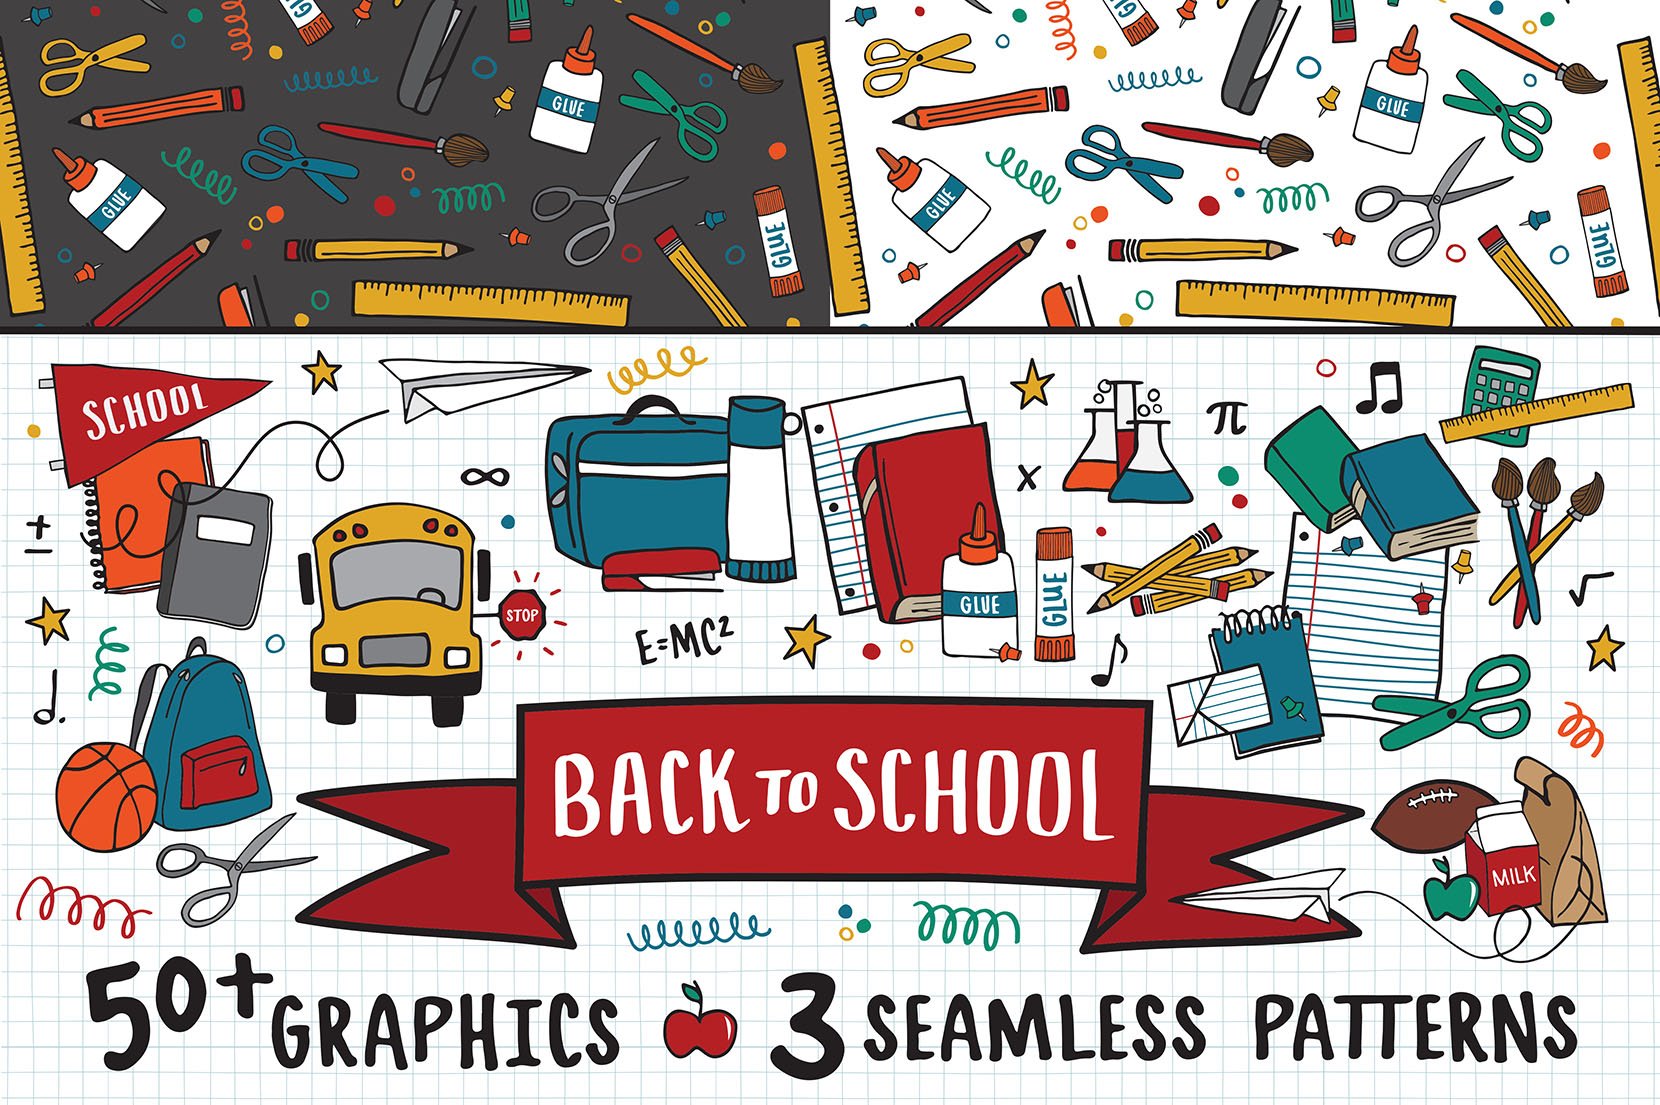 Back to School Graphics + Patterns cover image.